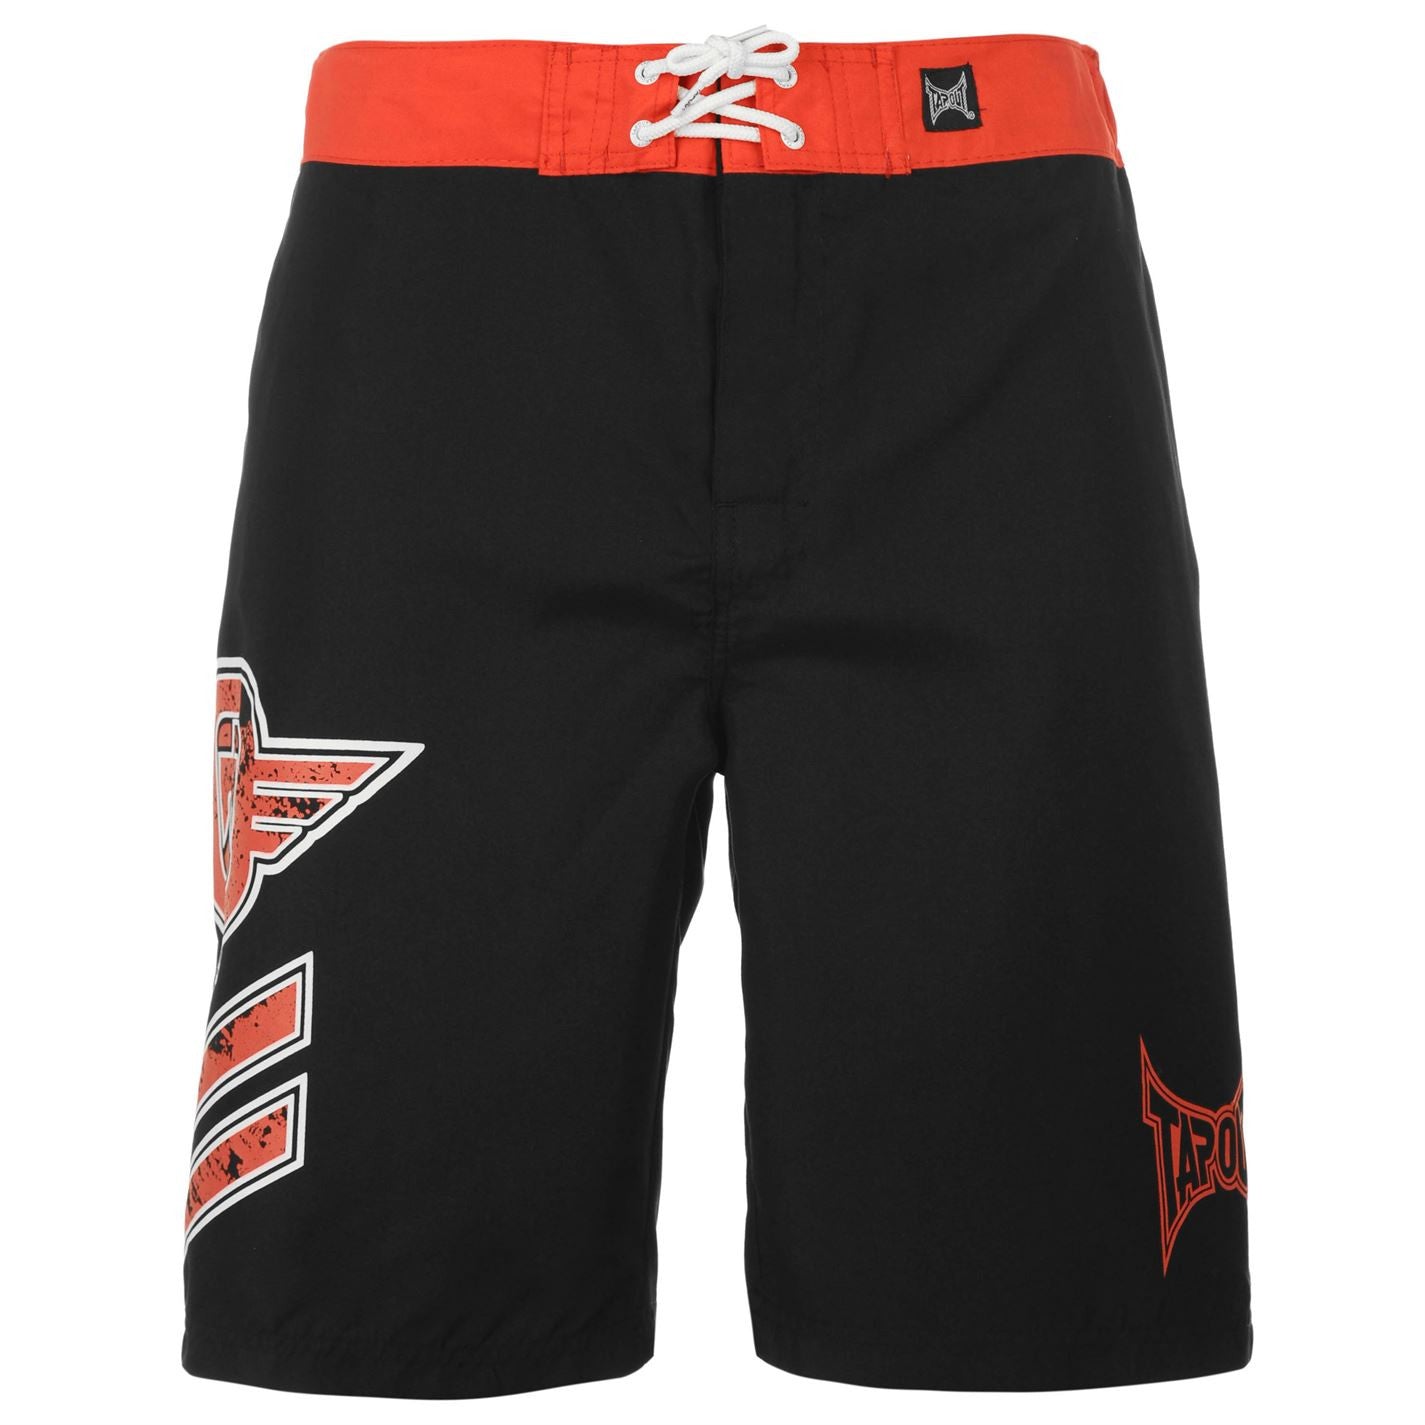 Tapout Winged Eagle Boardshorts